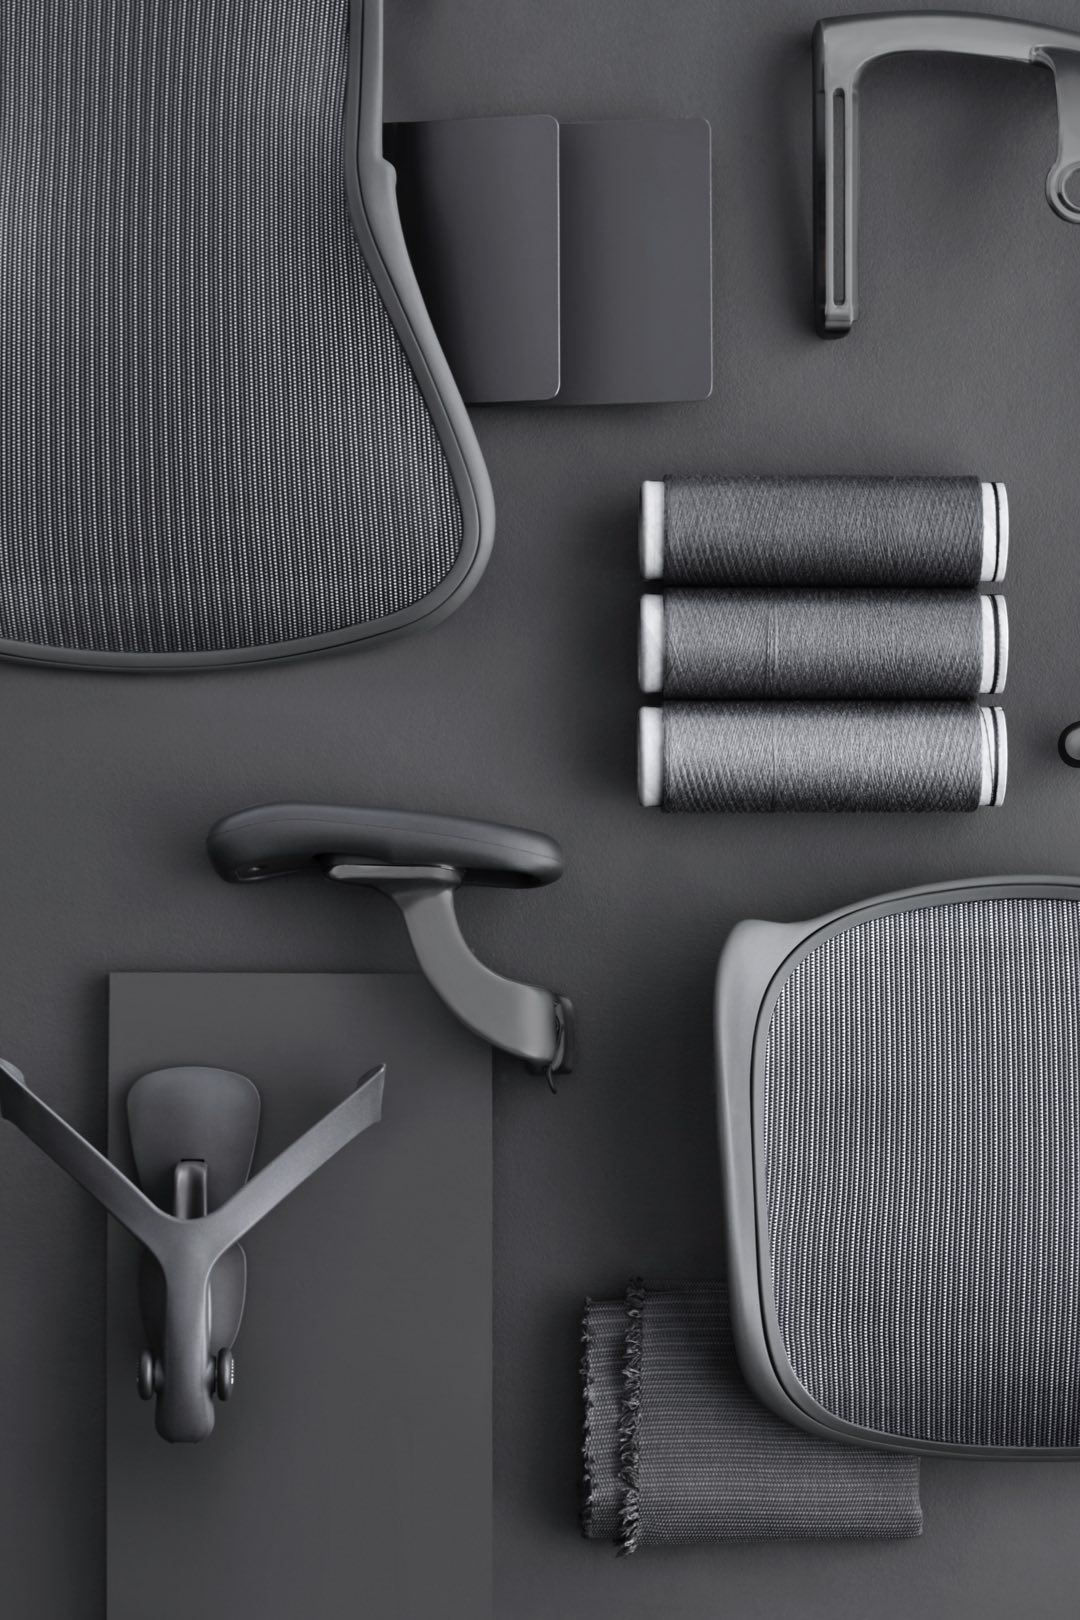 Individual parts of the new Aeron chair; including PostureFit SL pads, an armrest, set, and spools of Pellicle thread—all in Carbon finish—rest on a grey surface